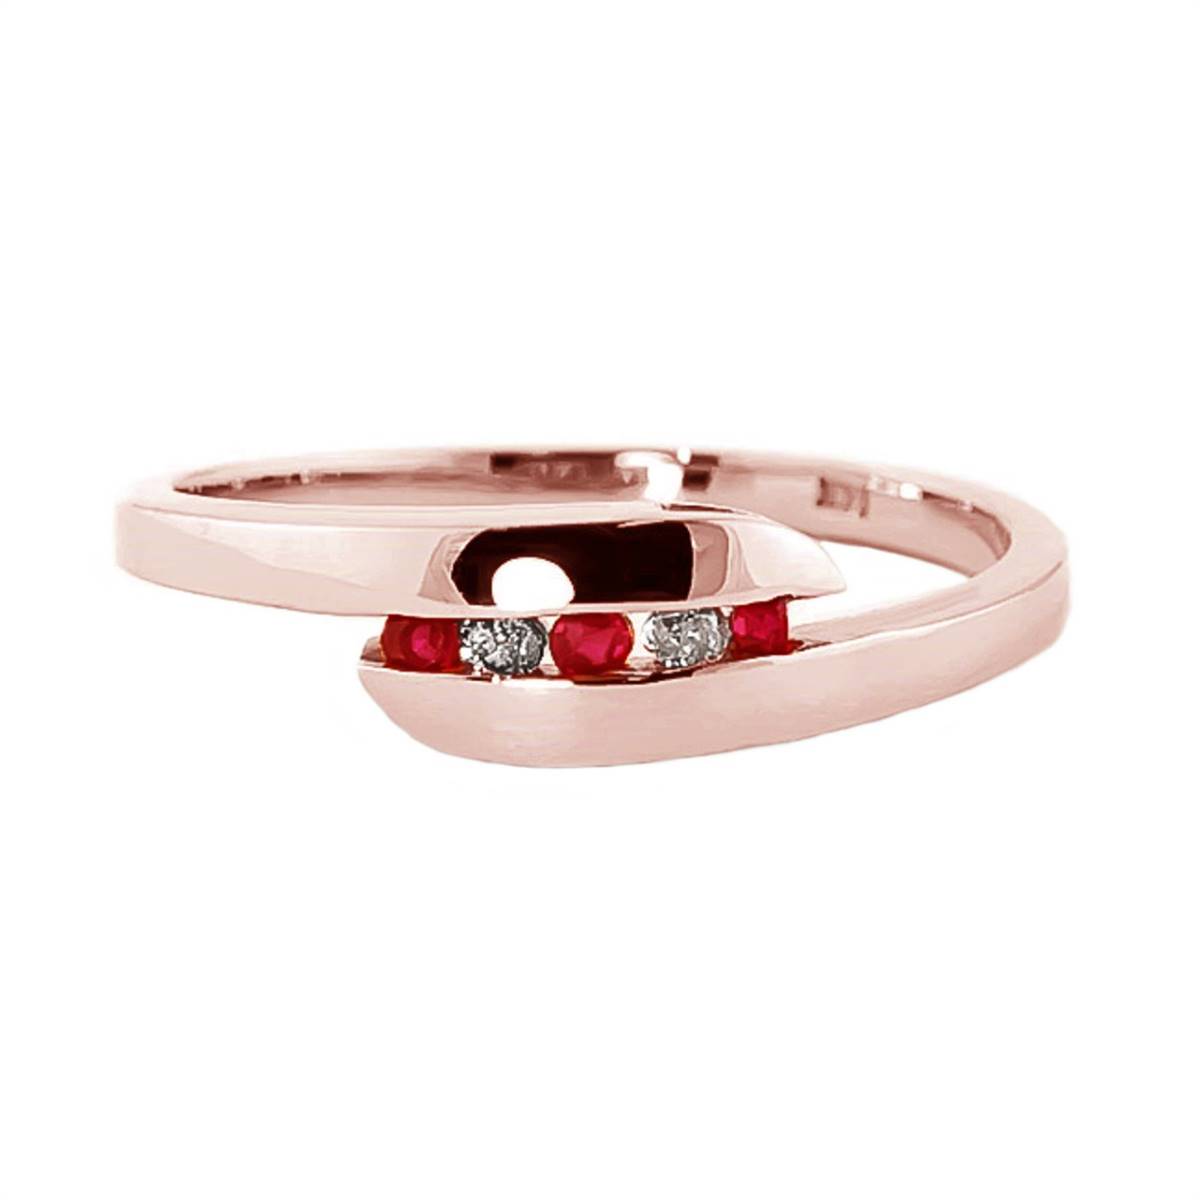 0.25 Carat 14K Solid Rose Gold Ring Channel Set Diamond Ruby